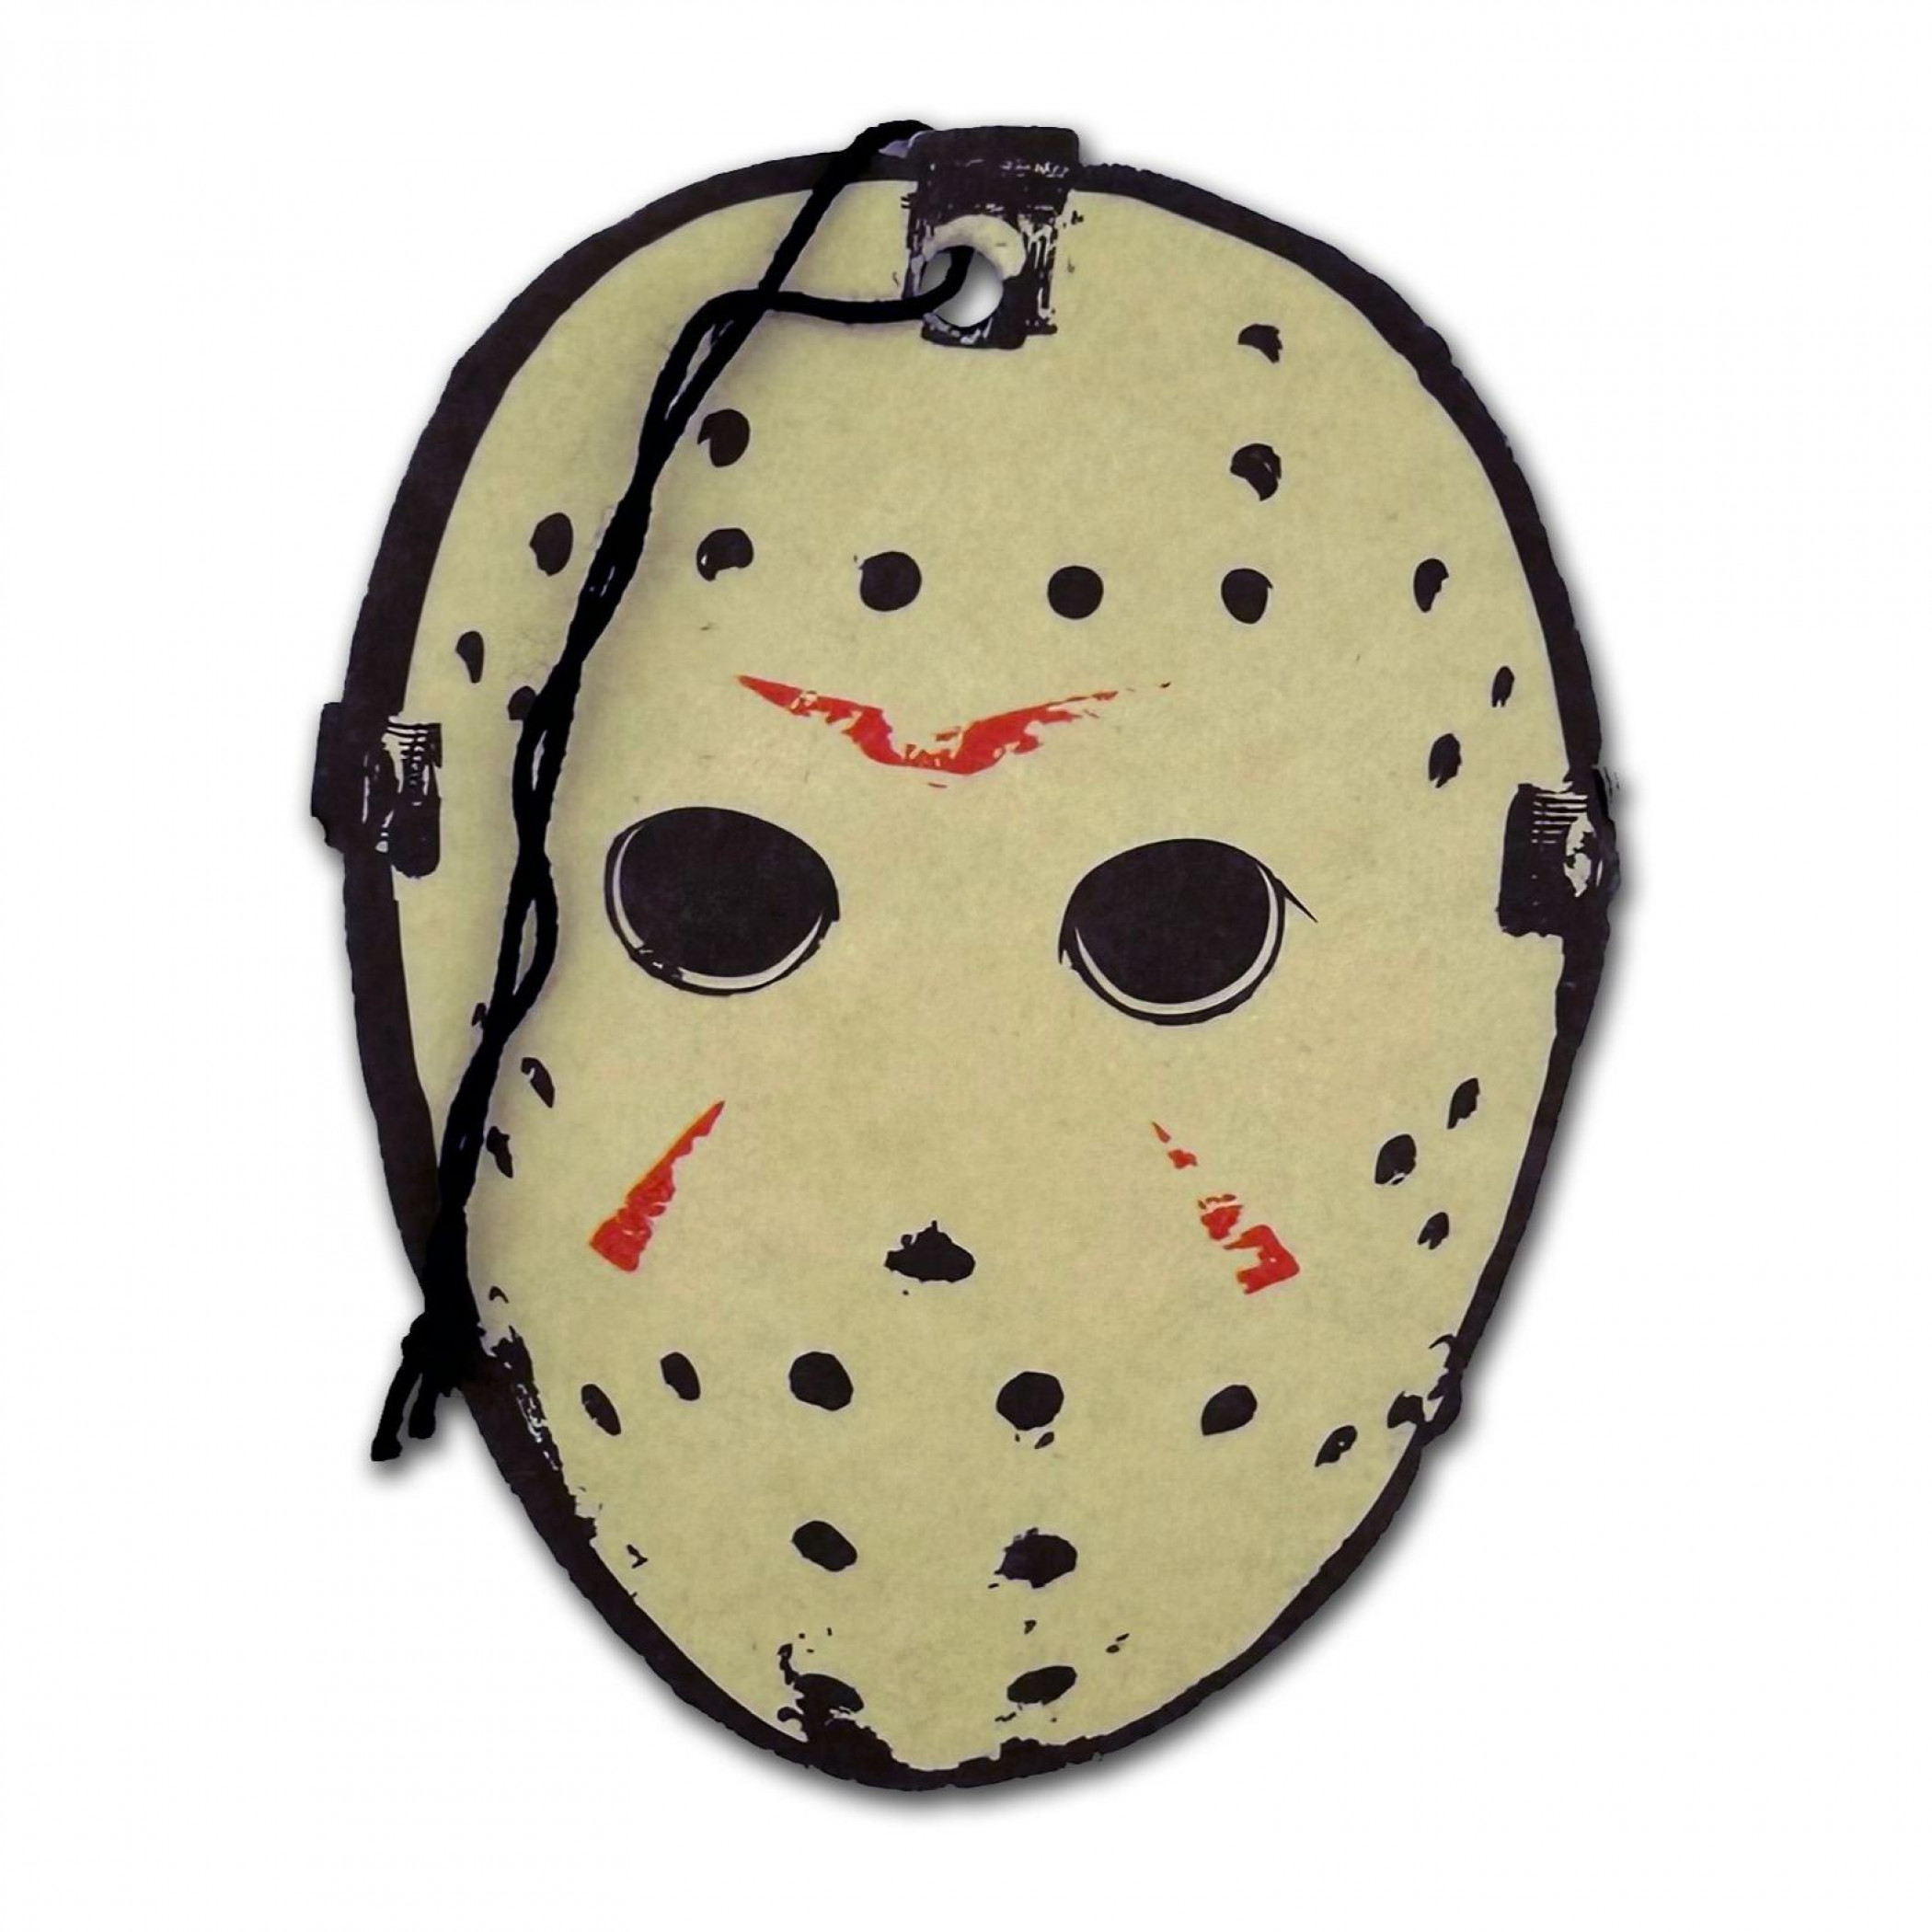 Jason Friday the 13th Midnight Chiller Scent Air Freshener - 2 Pack